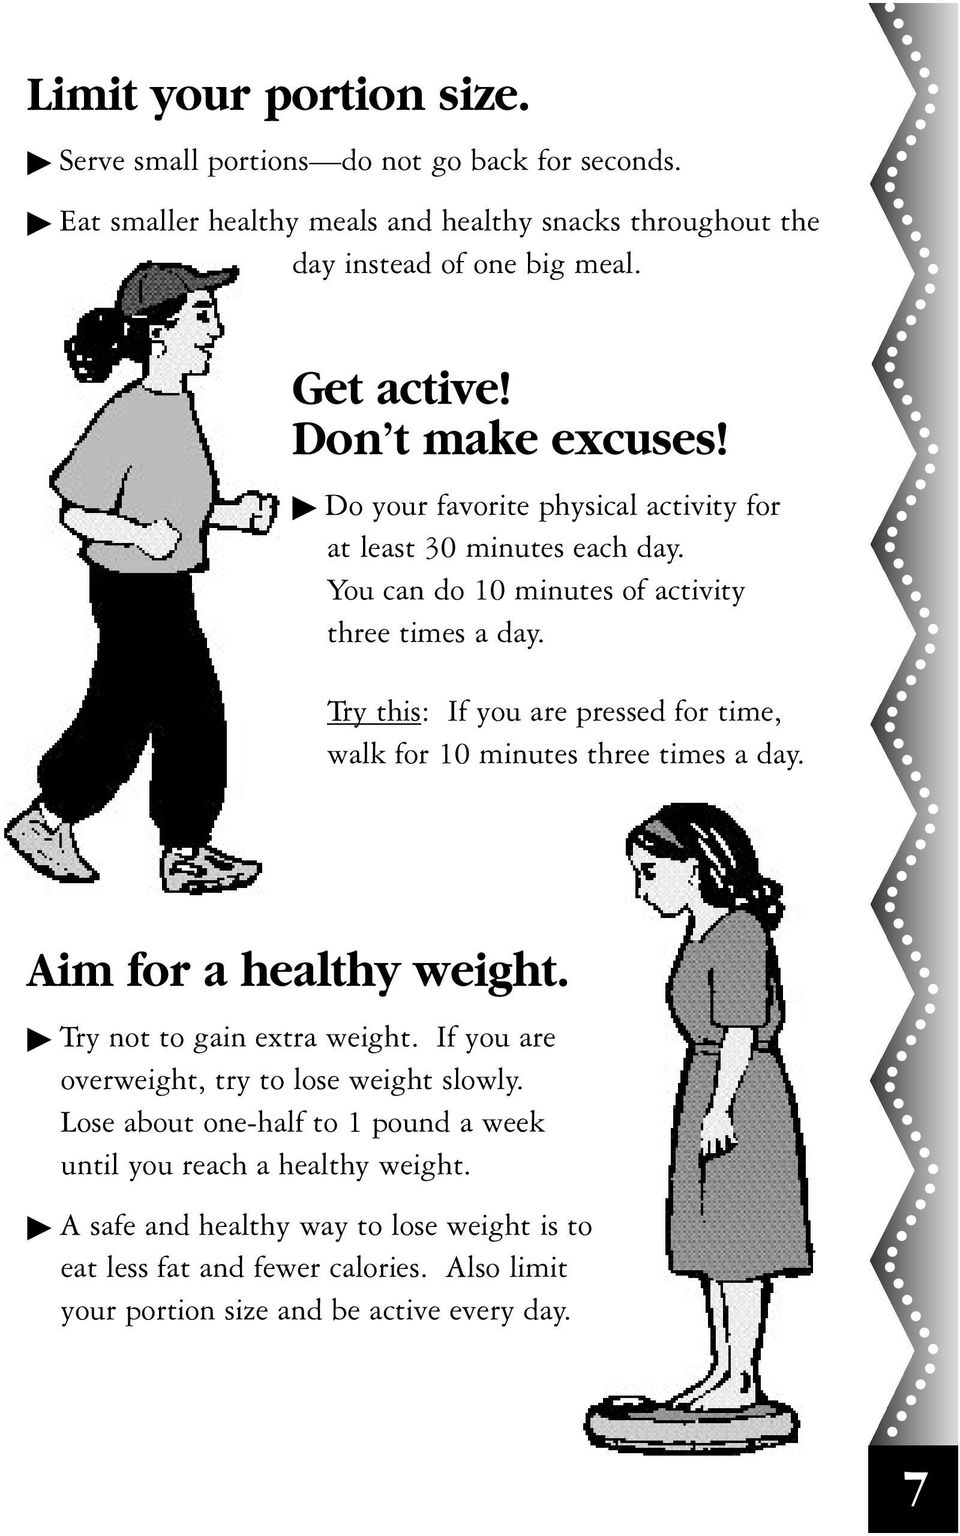 Try this: If you are pressed for time, walk for 10 minutes three times a day. Aim for a healthy weight. Try not to gain extra weight.